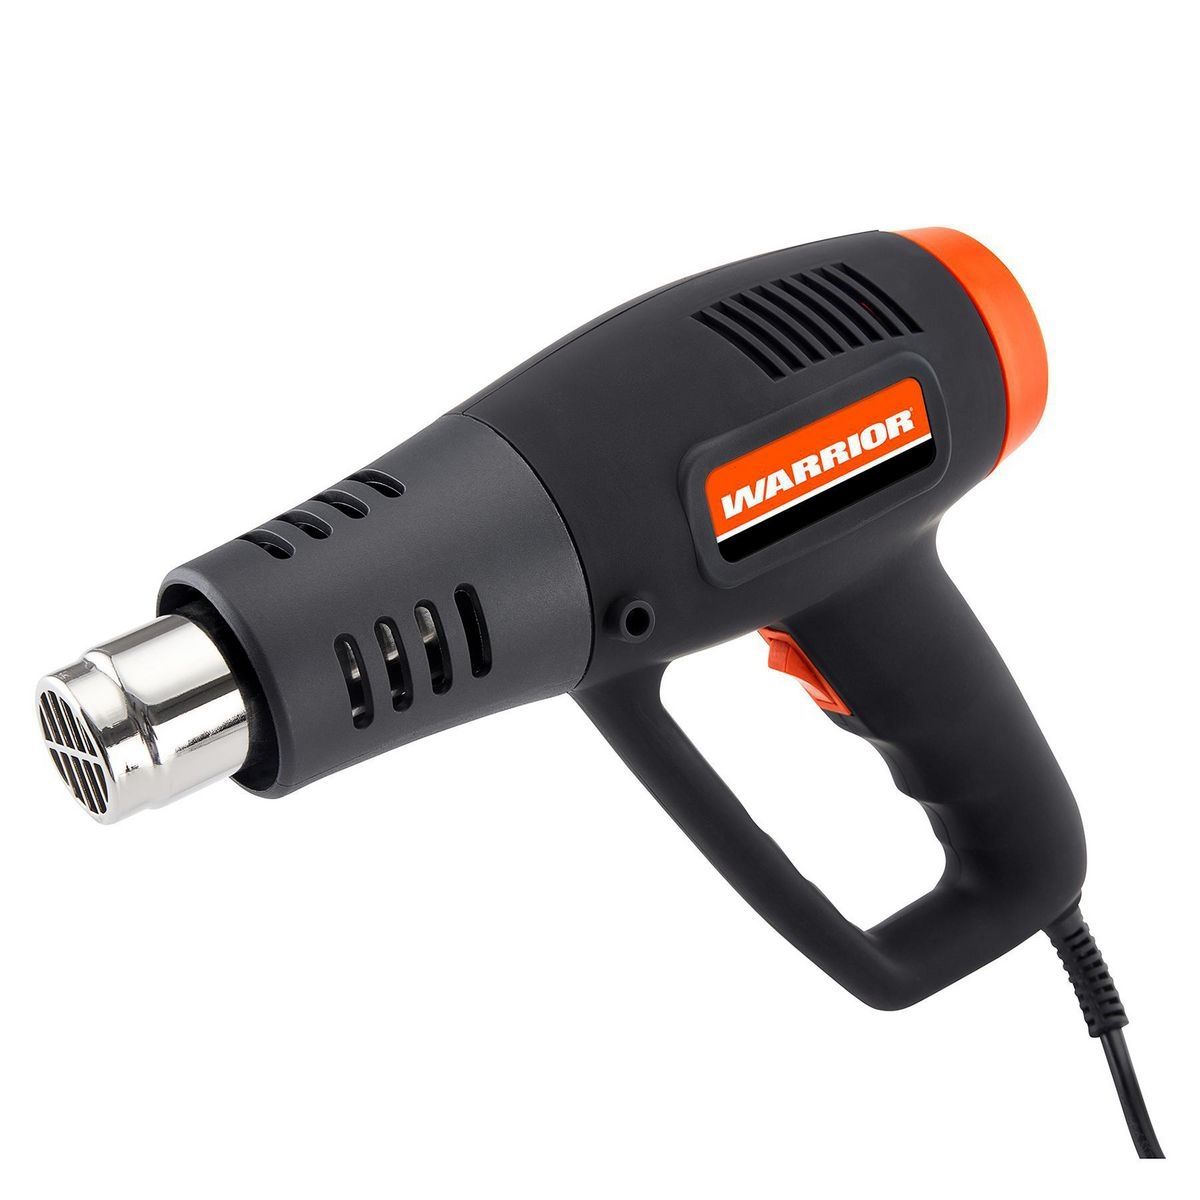 Close-up of the WARRIOR 1500W 11 Amp Heat Gun, showcasing its durable ABS body and dual temperature settings.